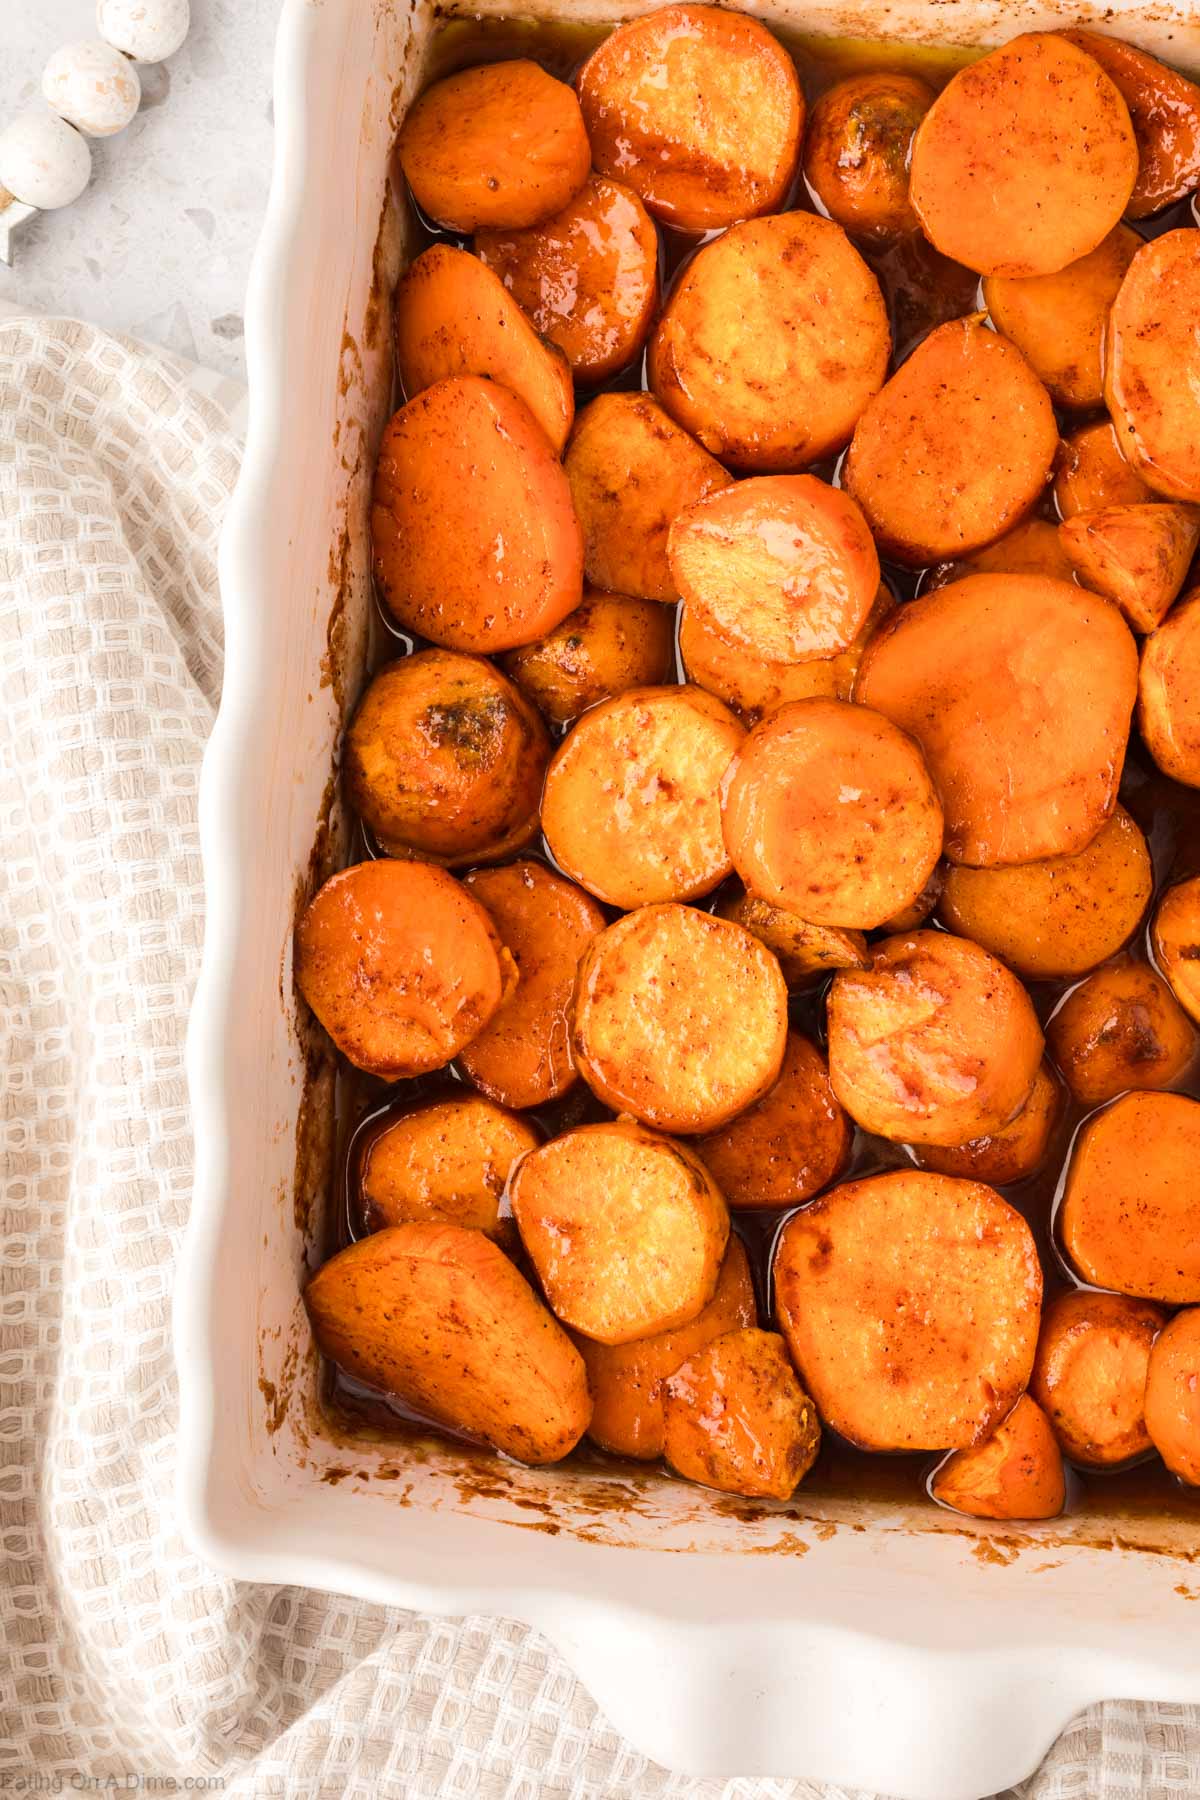 Candied Yams in a casserole dish